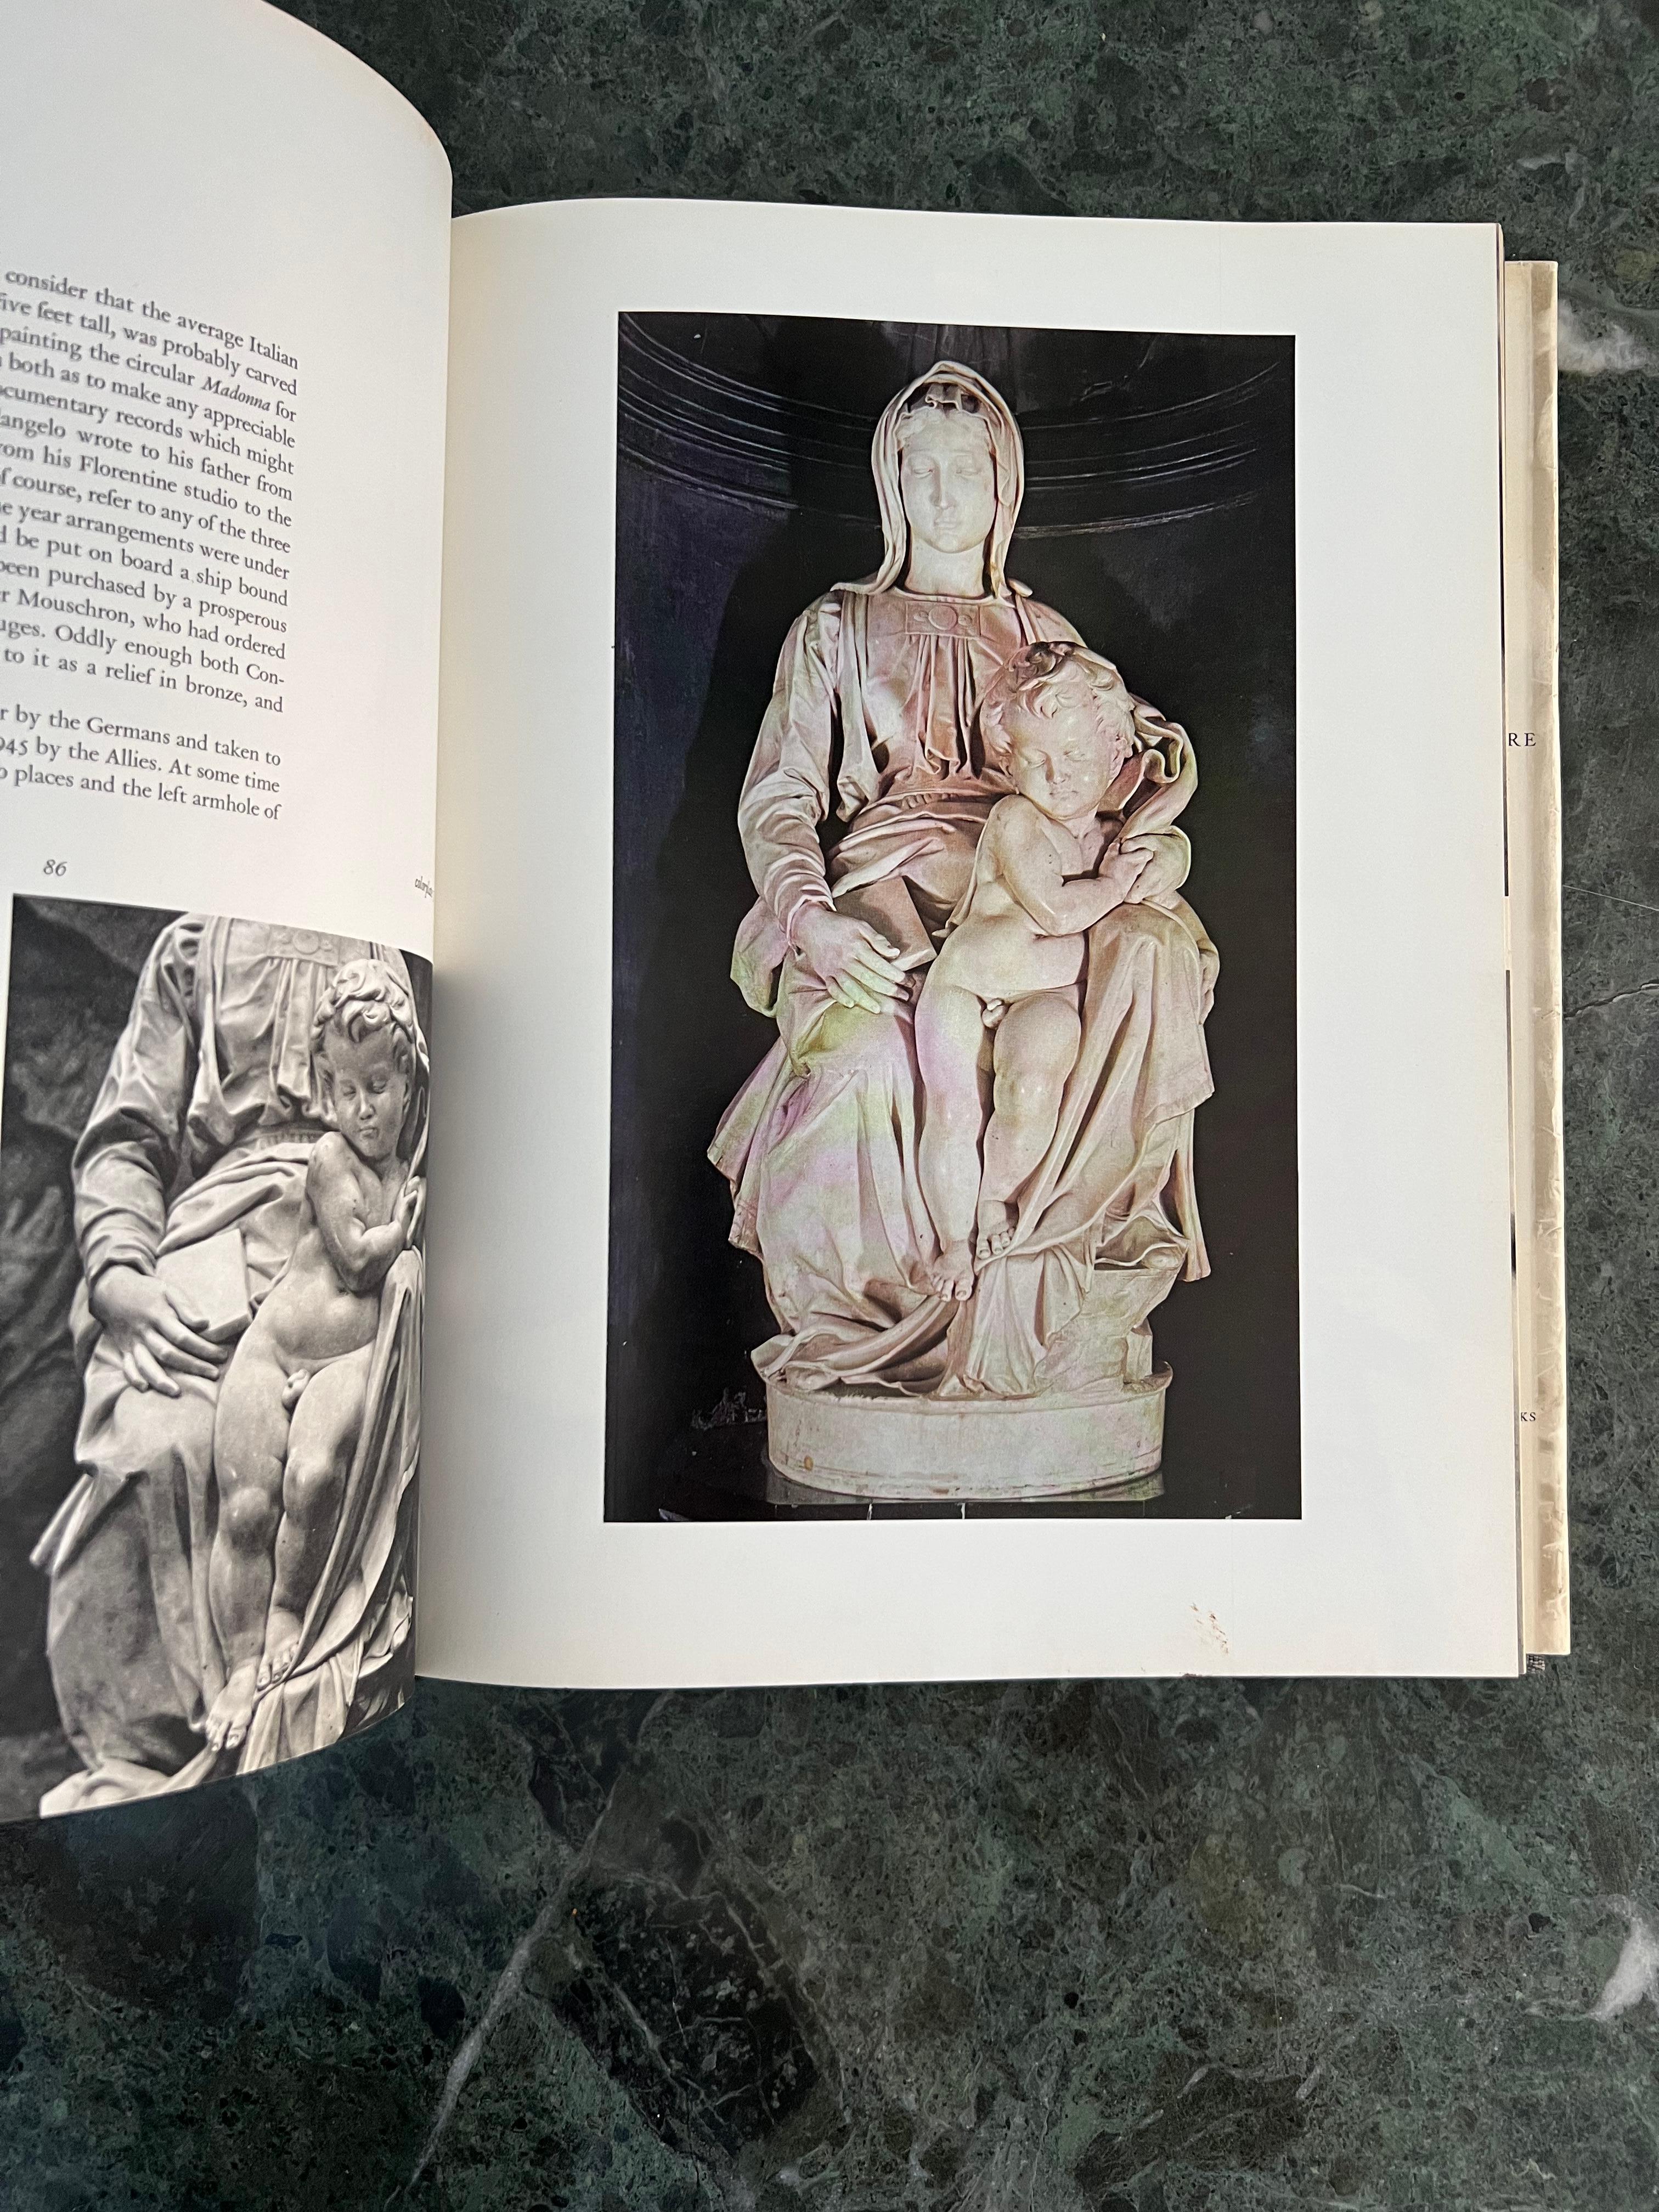 Japanese Large Collectible Art Book “Michelangelo: The Complete Sculpture”, 1982 For Sale